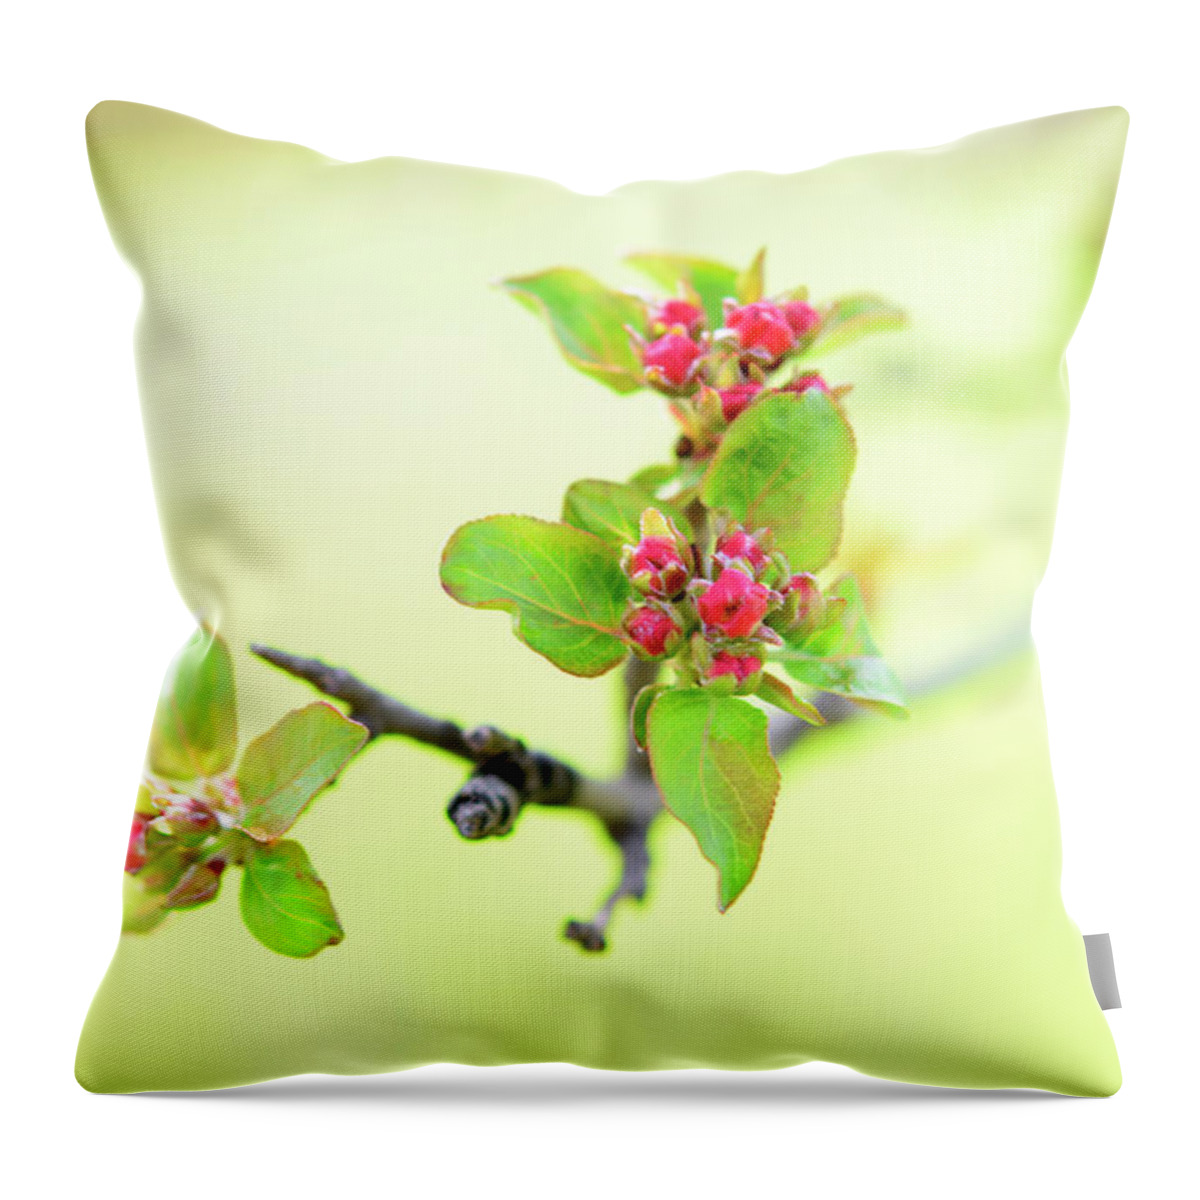 Spring Throw Pillow featuring the photograph Spring Hope by Linda L Brobeck